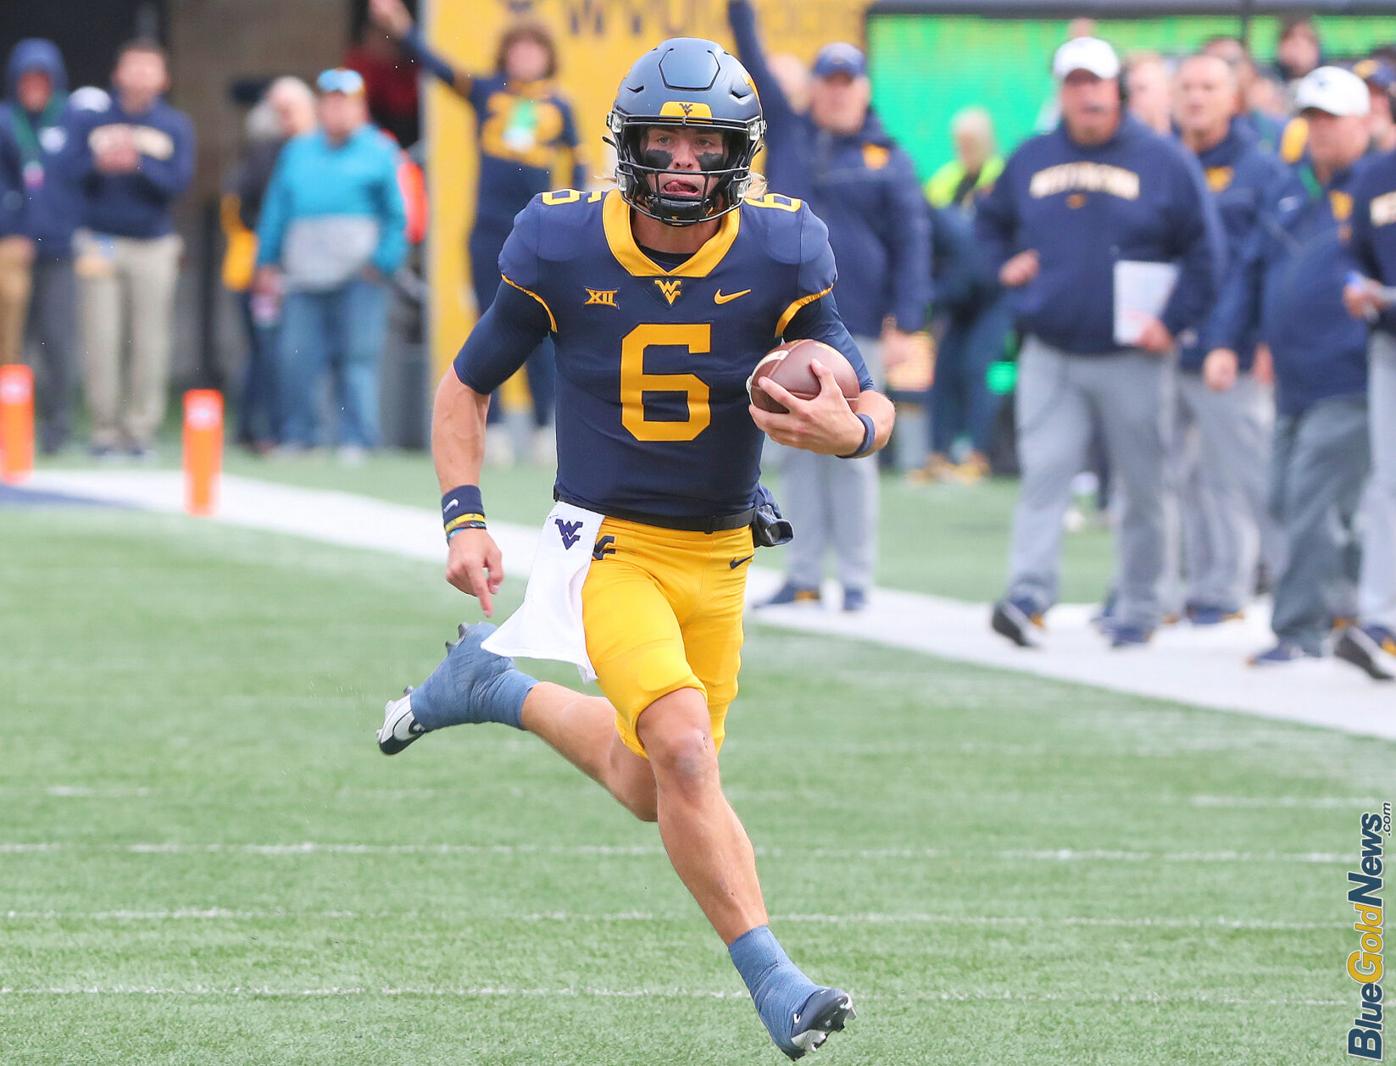 Re-imagining Mountaineers' football uniforms before Saturday's